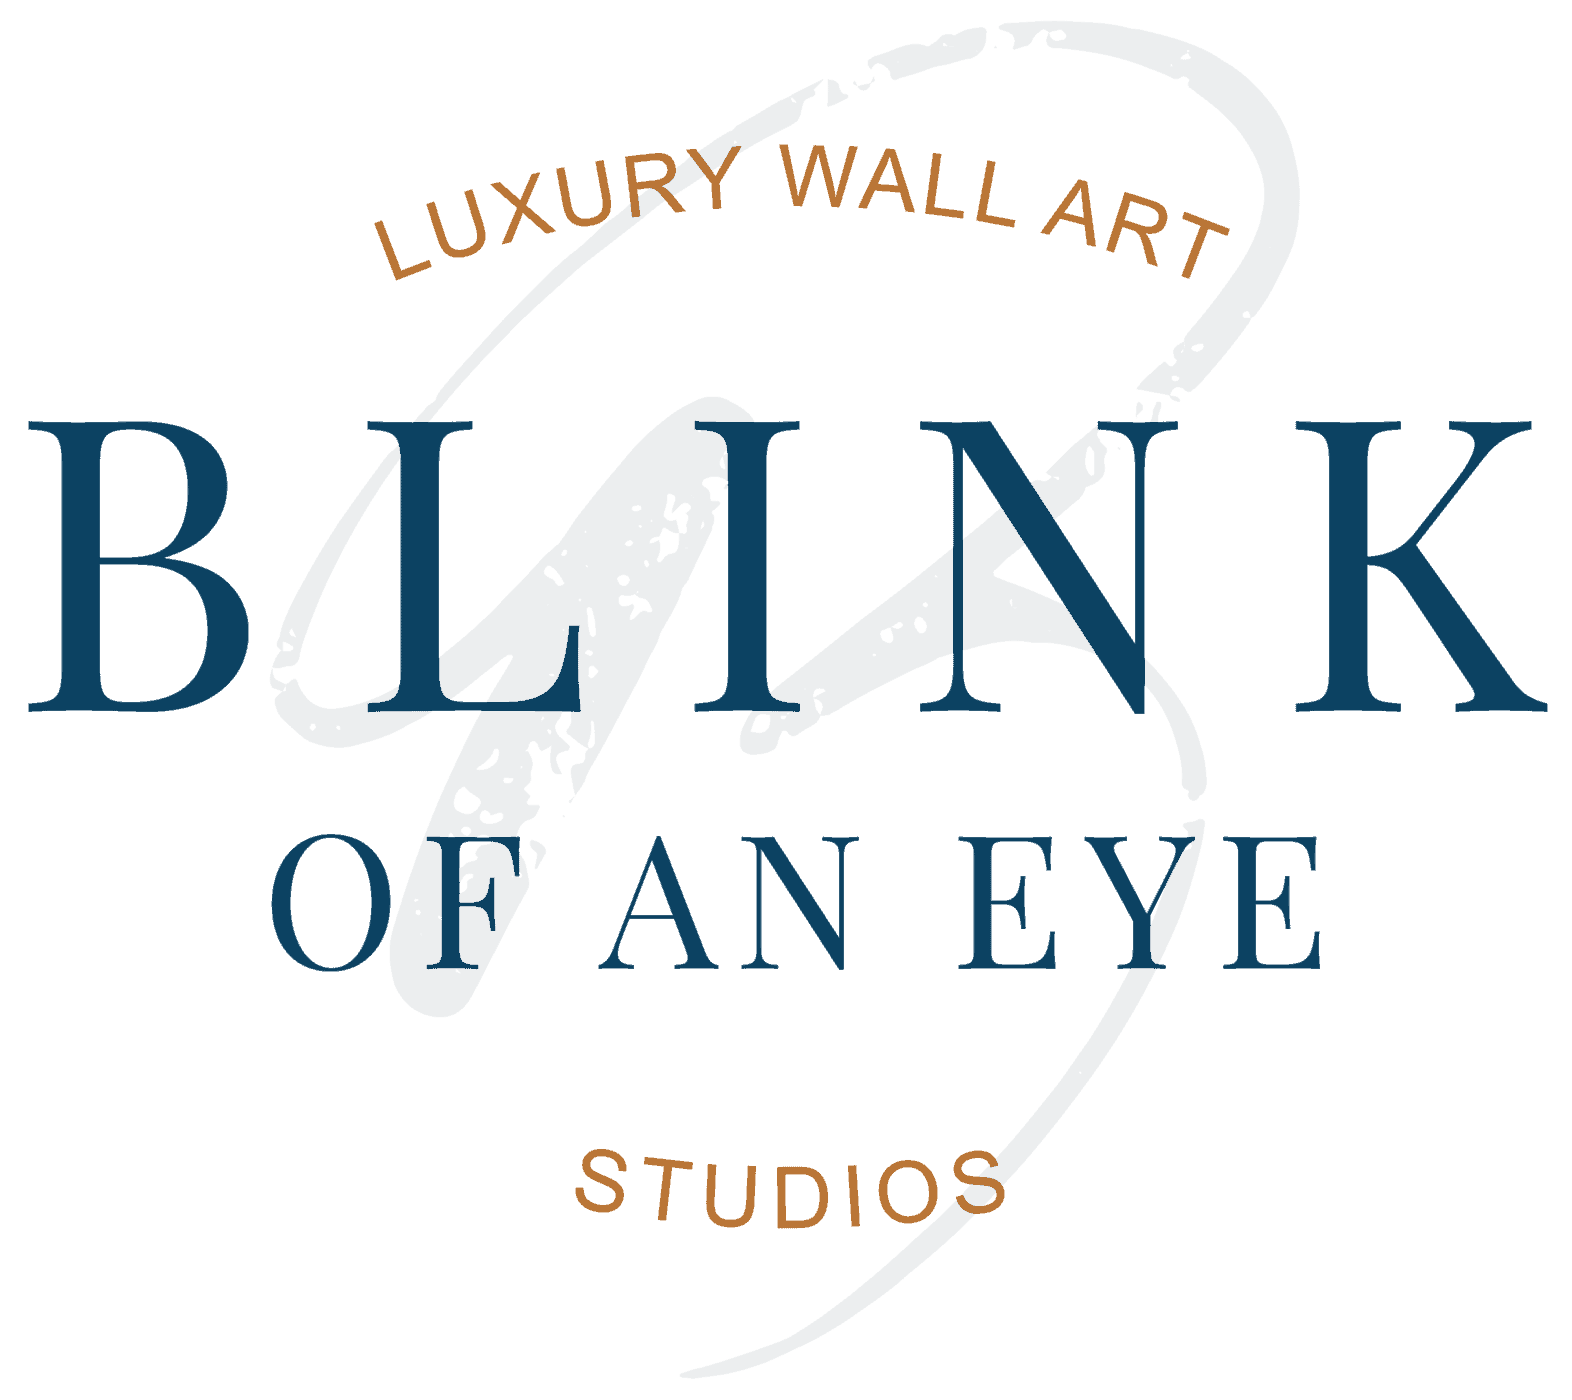 Blink of an eye logo in blue writing with transparent background